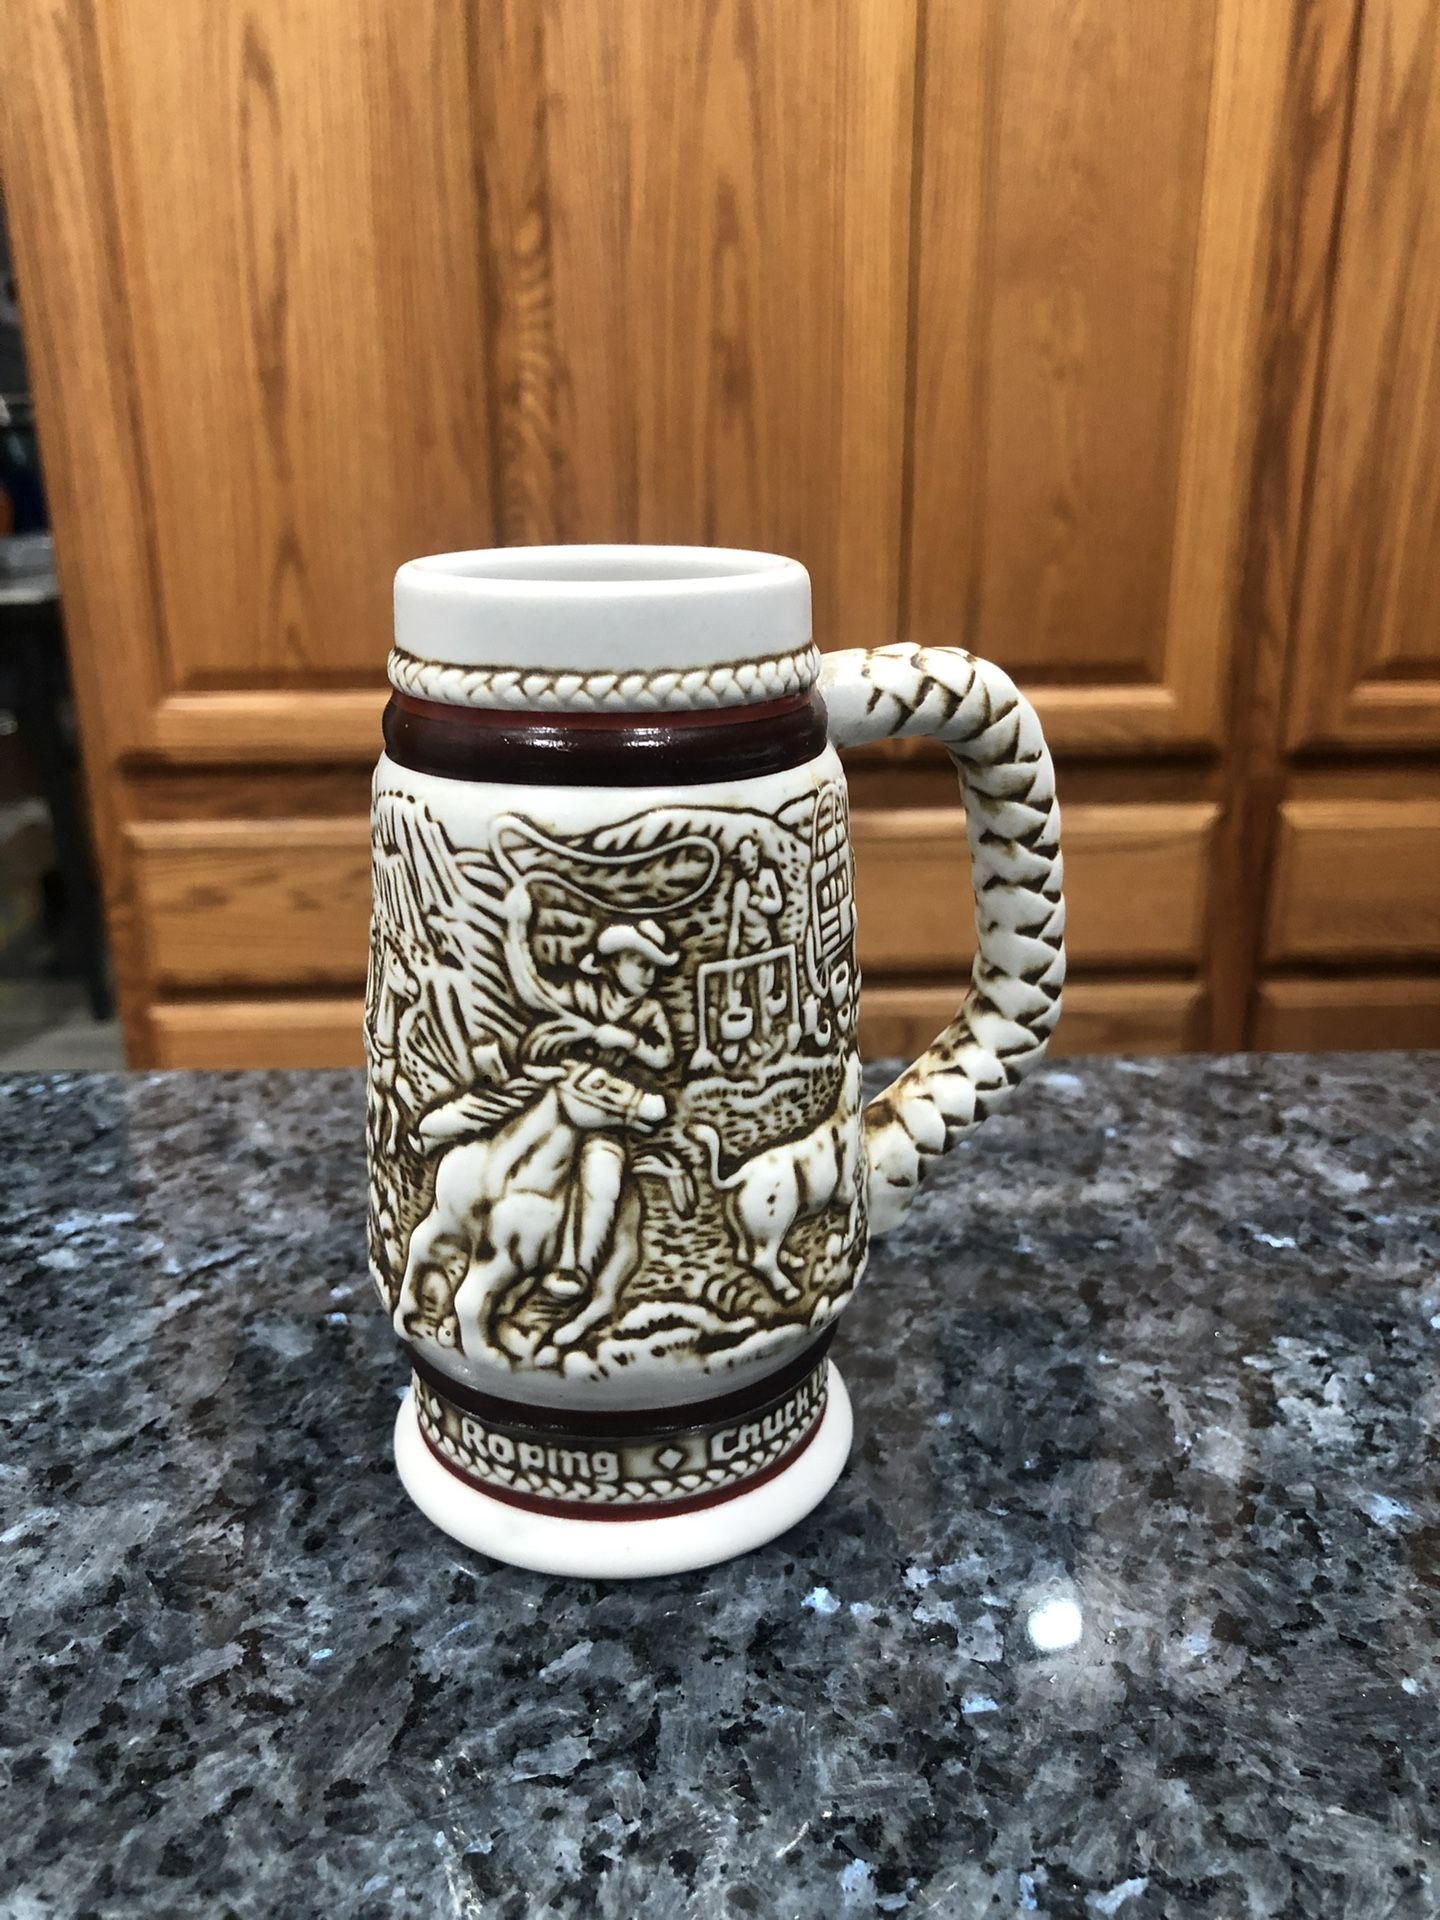 Vintage Avon 1983 Collectible Small Beer Stein Western Roundup Cowboys.  Limited Edition.  Preowned Good Condition 